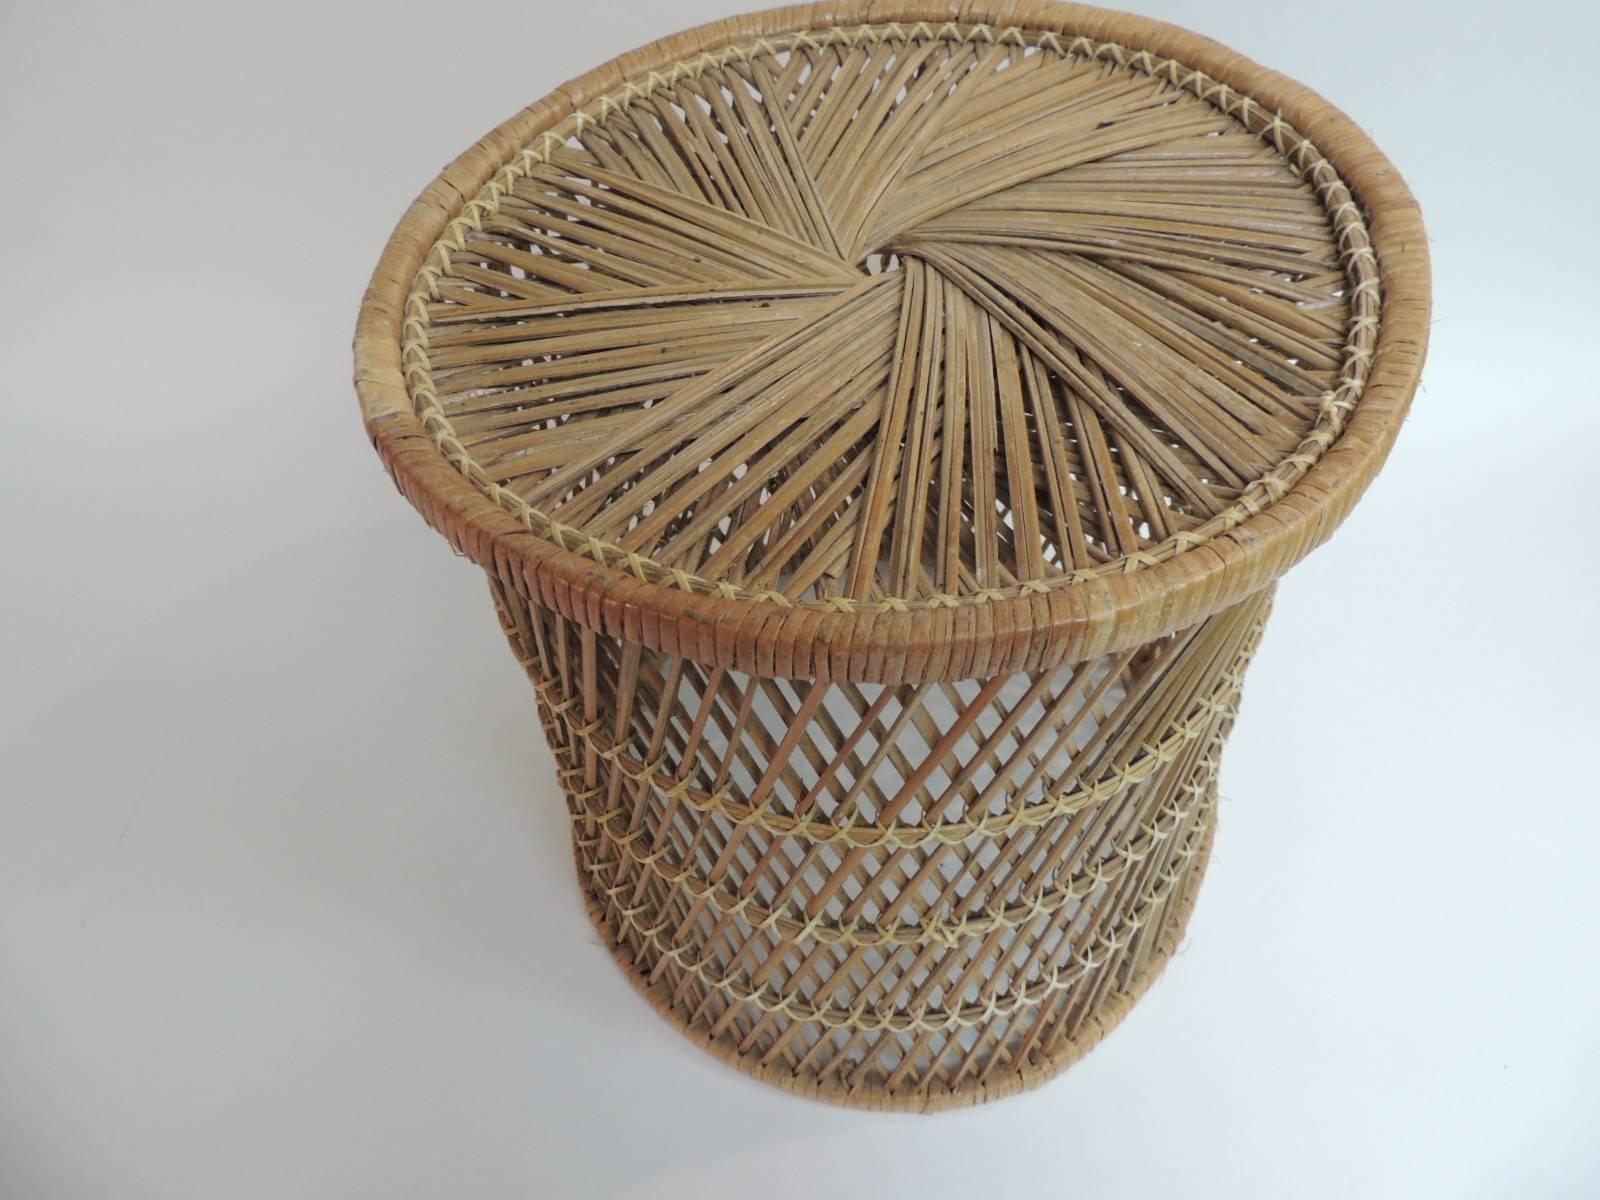 Offered by the Antique Textiles Galleries:
Vintage small round rattan side table
Rattan vintage small round side table with intricate woven design different in the top and the sides.
Size: 14 D x 15.5” H.

 